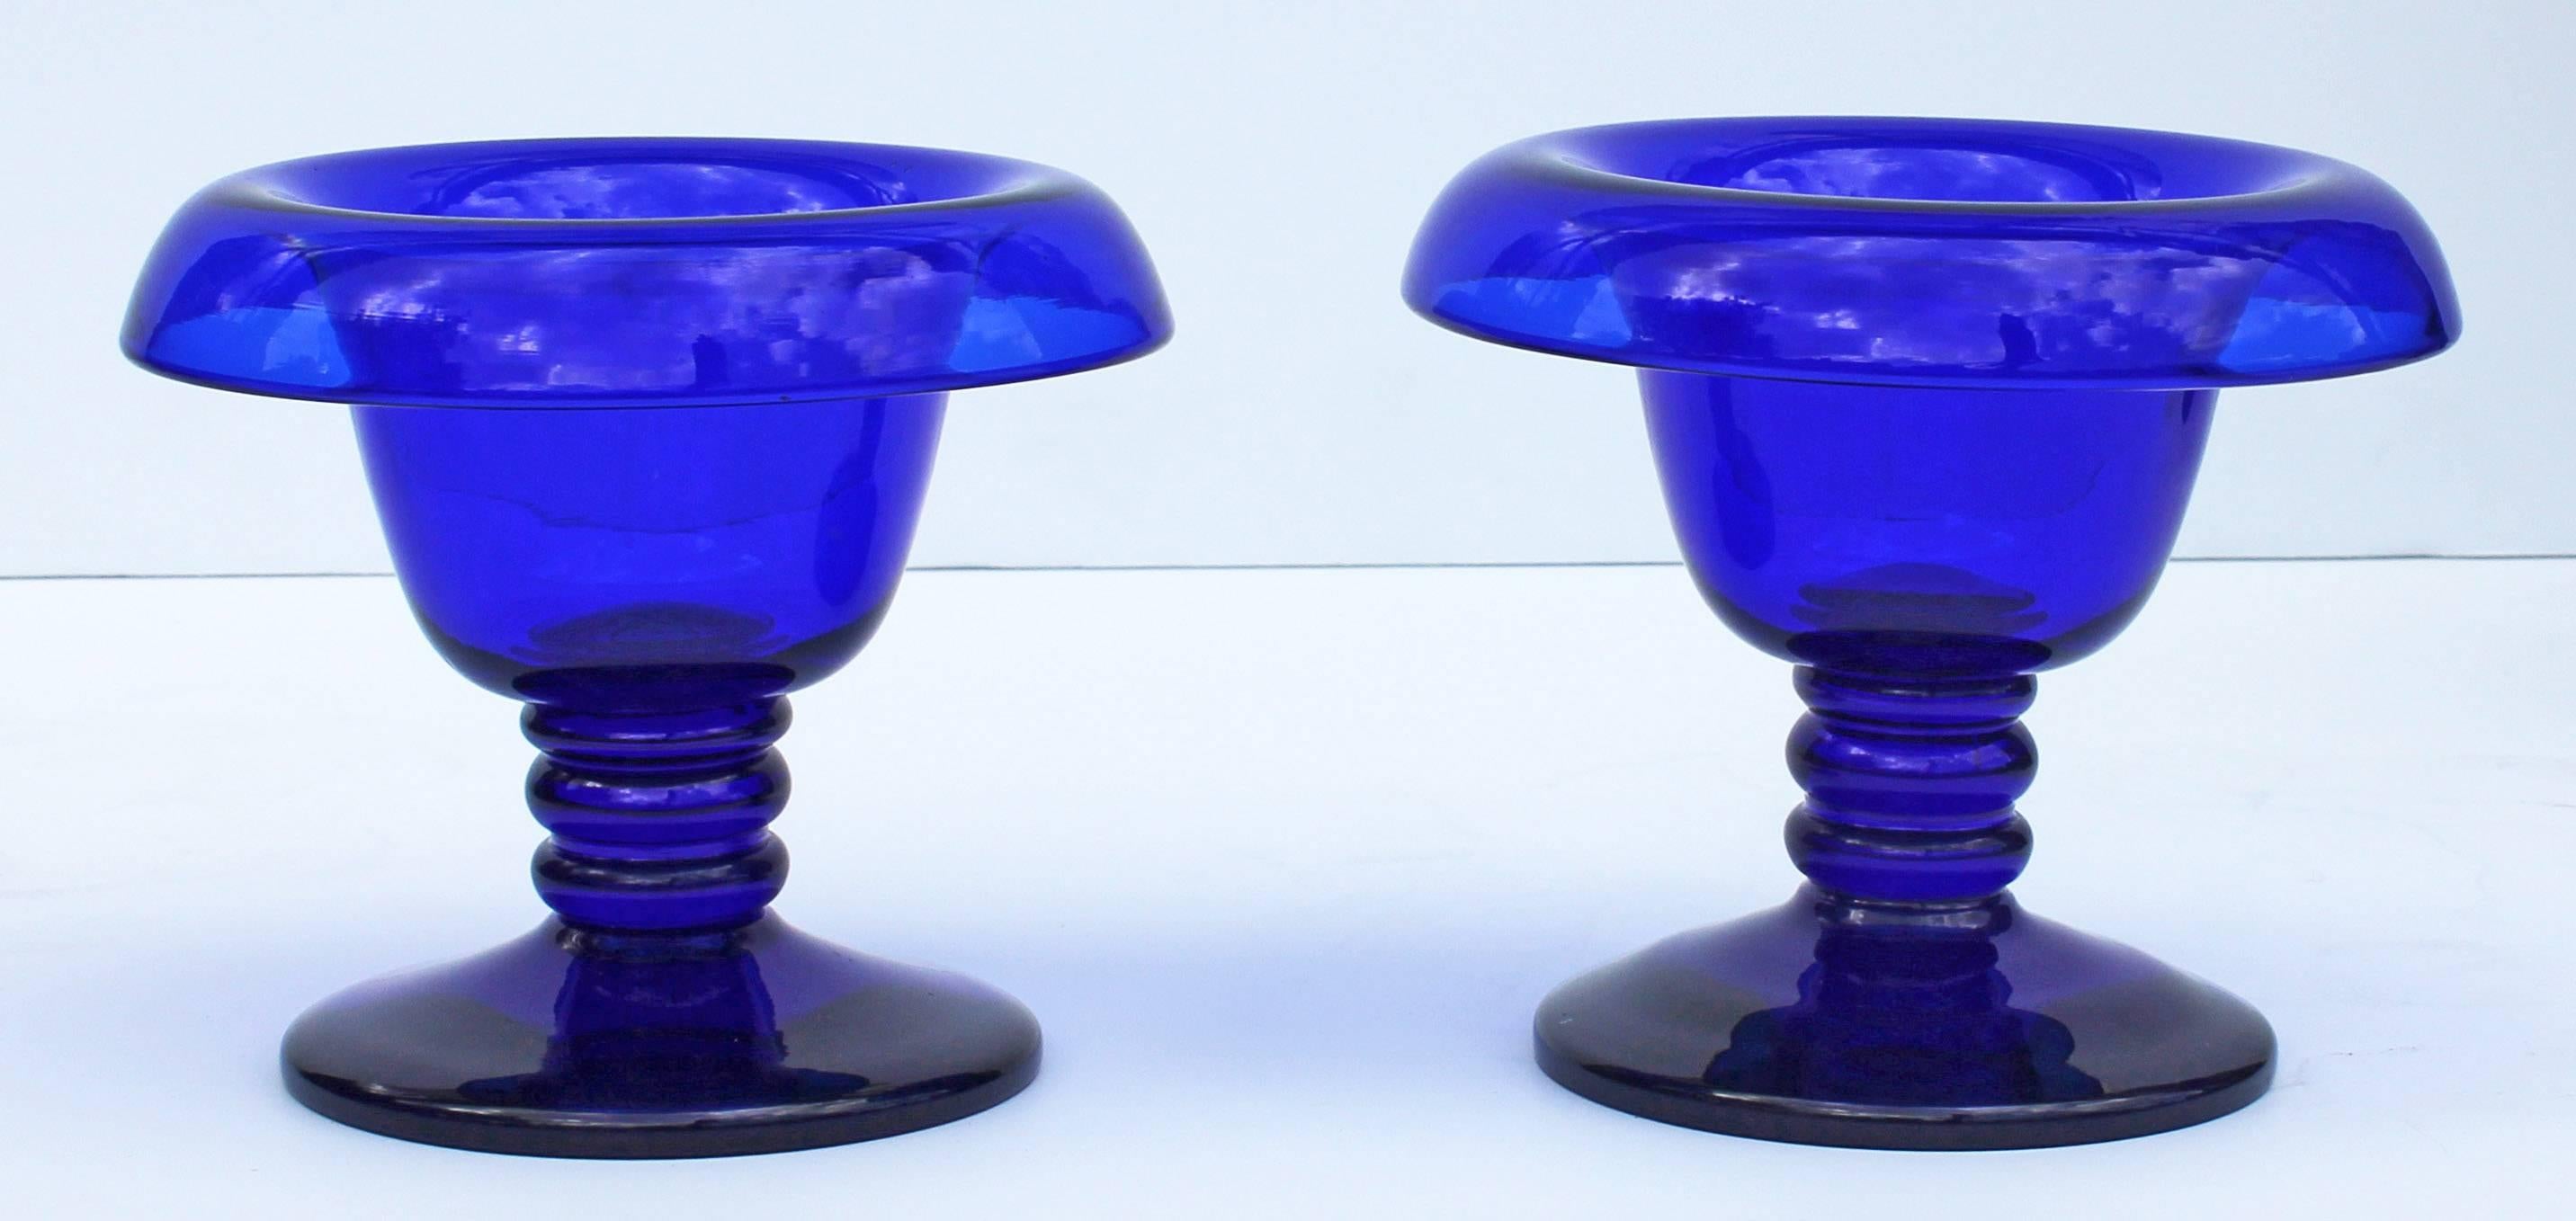 Neoclassical Revival Antique Blue Glass Compotes